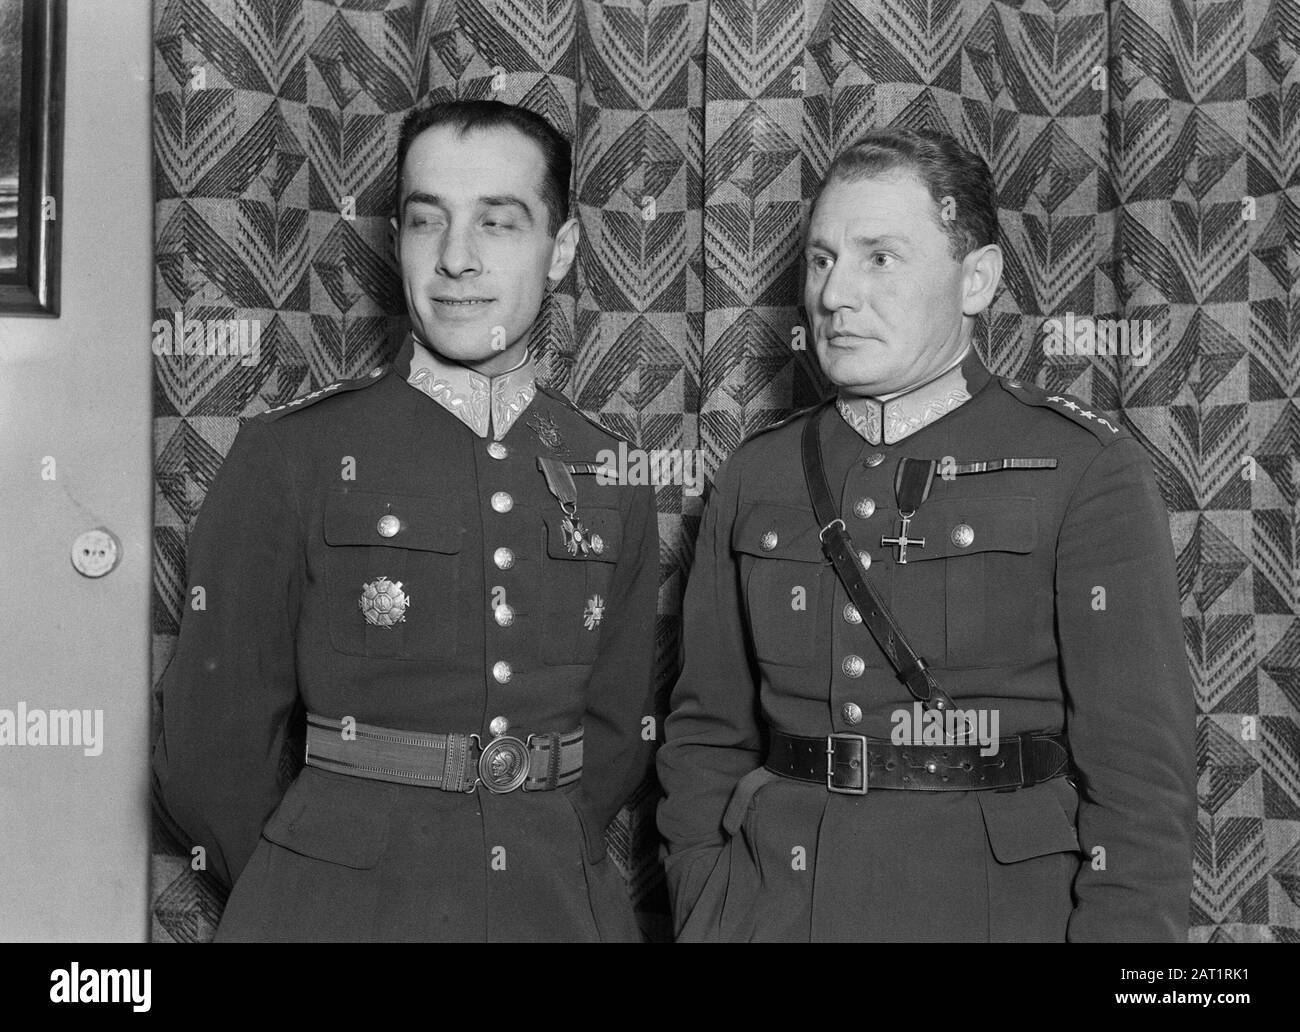 Travel to Poland  Warsaw. Portrait of the Air Force Captains and Ballooners Zbigniew Burzynski (1902-1971) and Franciszek Hynek (1897-1958) Annotation: These two Air Force Officers have made themselves meritorious for Polish aviation. Their interest was the balloon flight and the airship (zeppelin). As balloons, they won the Gordon Bennett Cup several times. In 1934 they brought the Polish flight record for air balloons at 44 hours Date: 1934 Location: Poland, Warsaw Keywords: ballooning, Air Force, military Personnel: Hynek, Franciszek, Burzynsk, Zibigniew Stock Photo